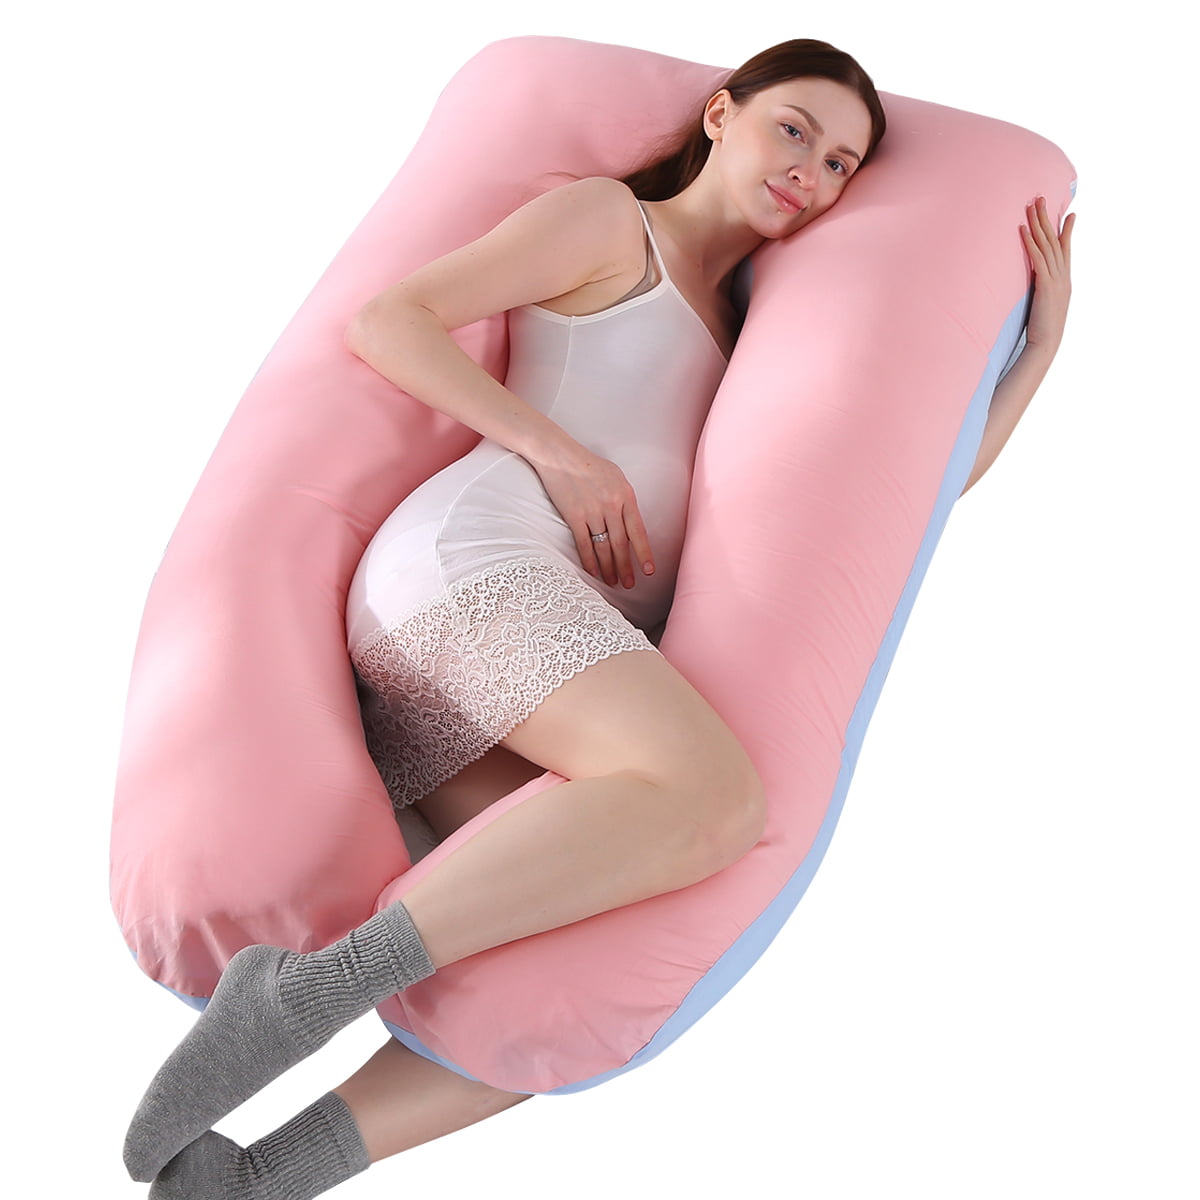 Plirnchsvo Pregnancy Pillow U G Shaped Full Body Cooling Cover with Detachable Side Maternity Support for Pregnant Women